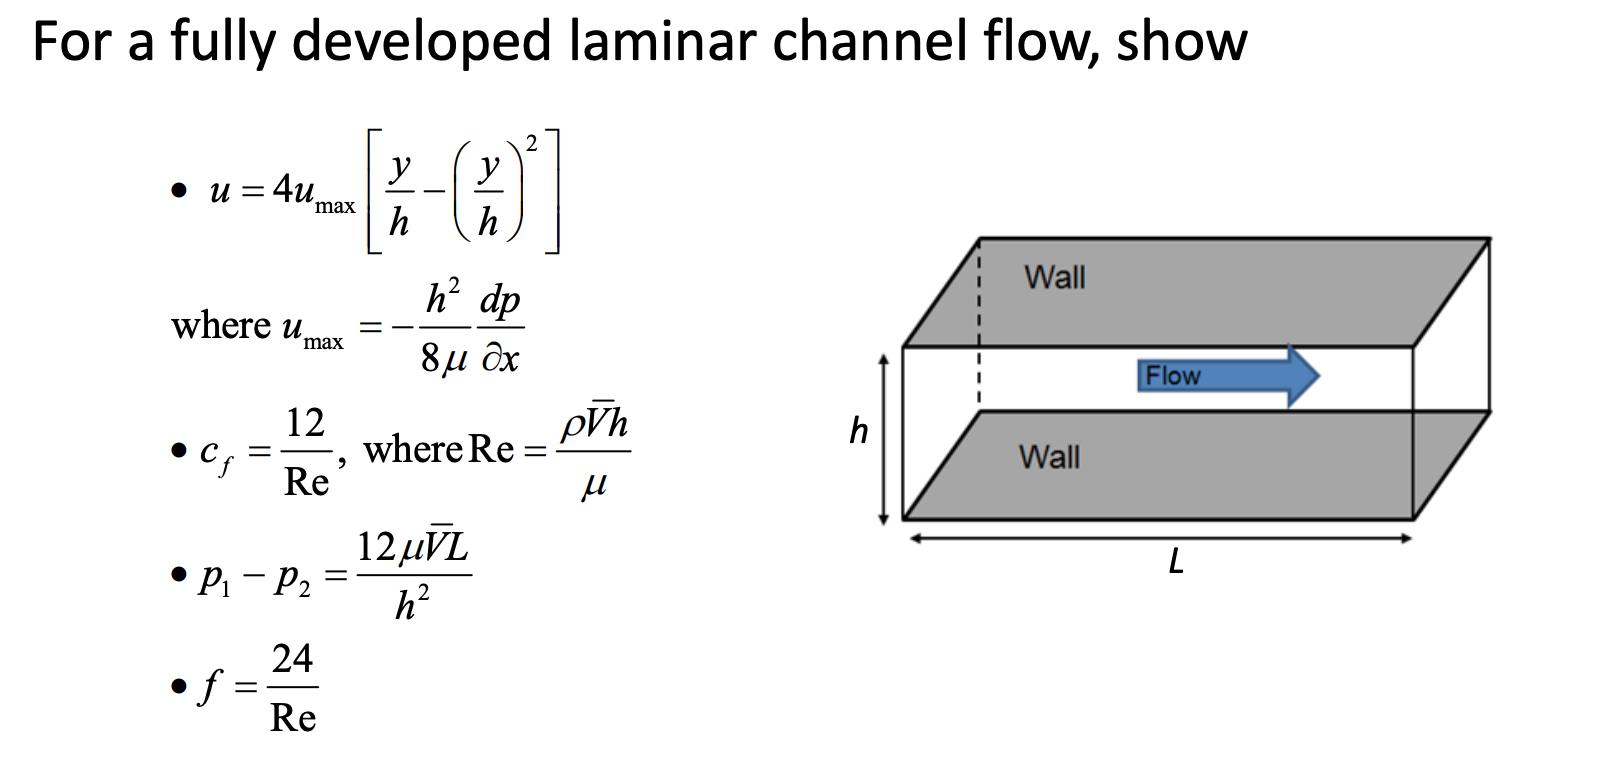 For a fully developed laminar channel flow, show  u=4u. where u  Cf = f= P - P = max max 12 Re 24 Re 9 - y h